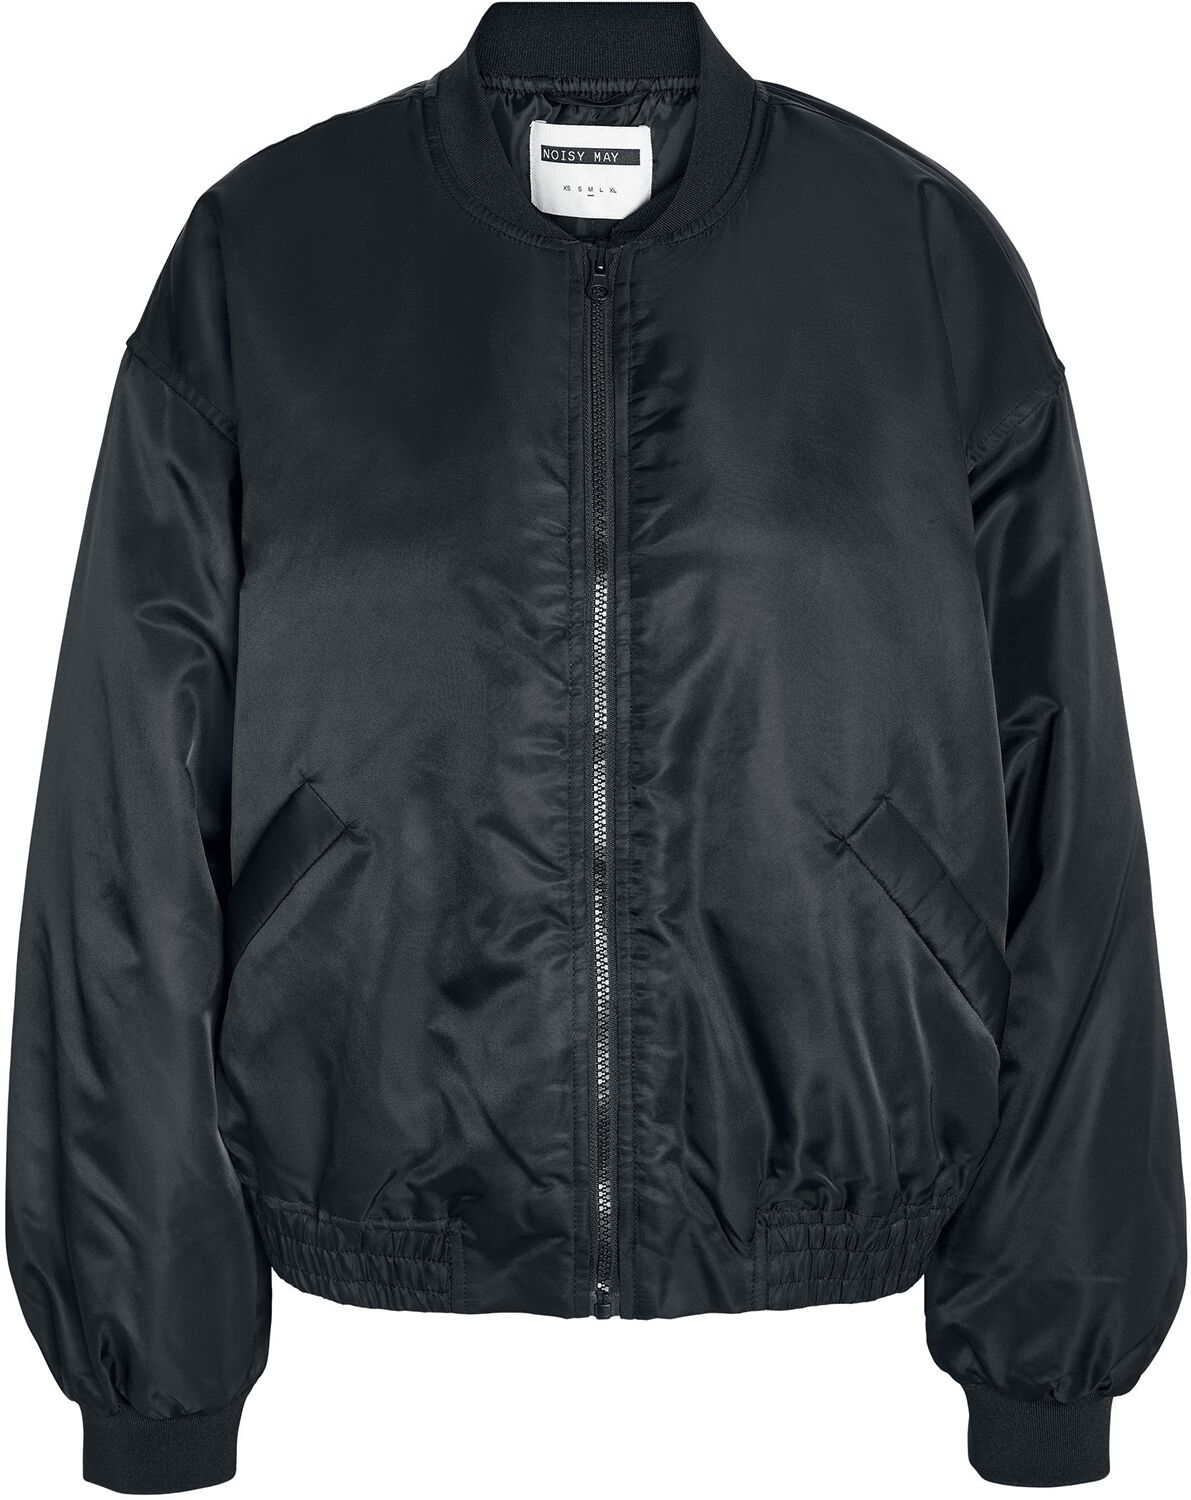 Image of Giacca Bomber di Noisy May - NMJustine padded bomber jacket - XS a L - Donna - nero